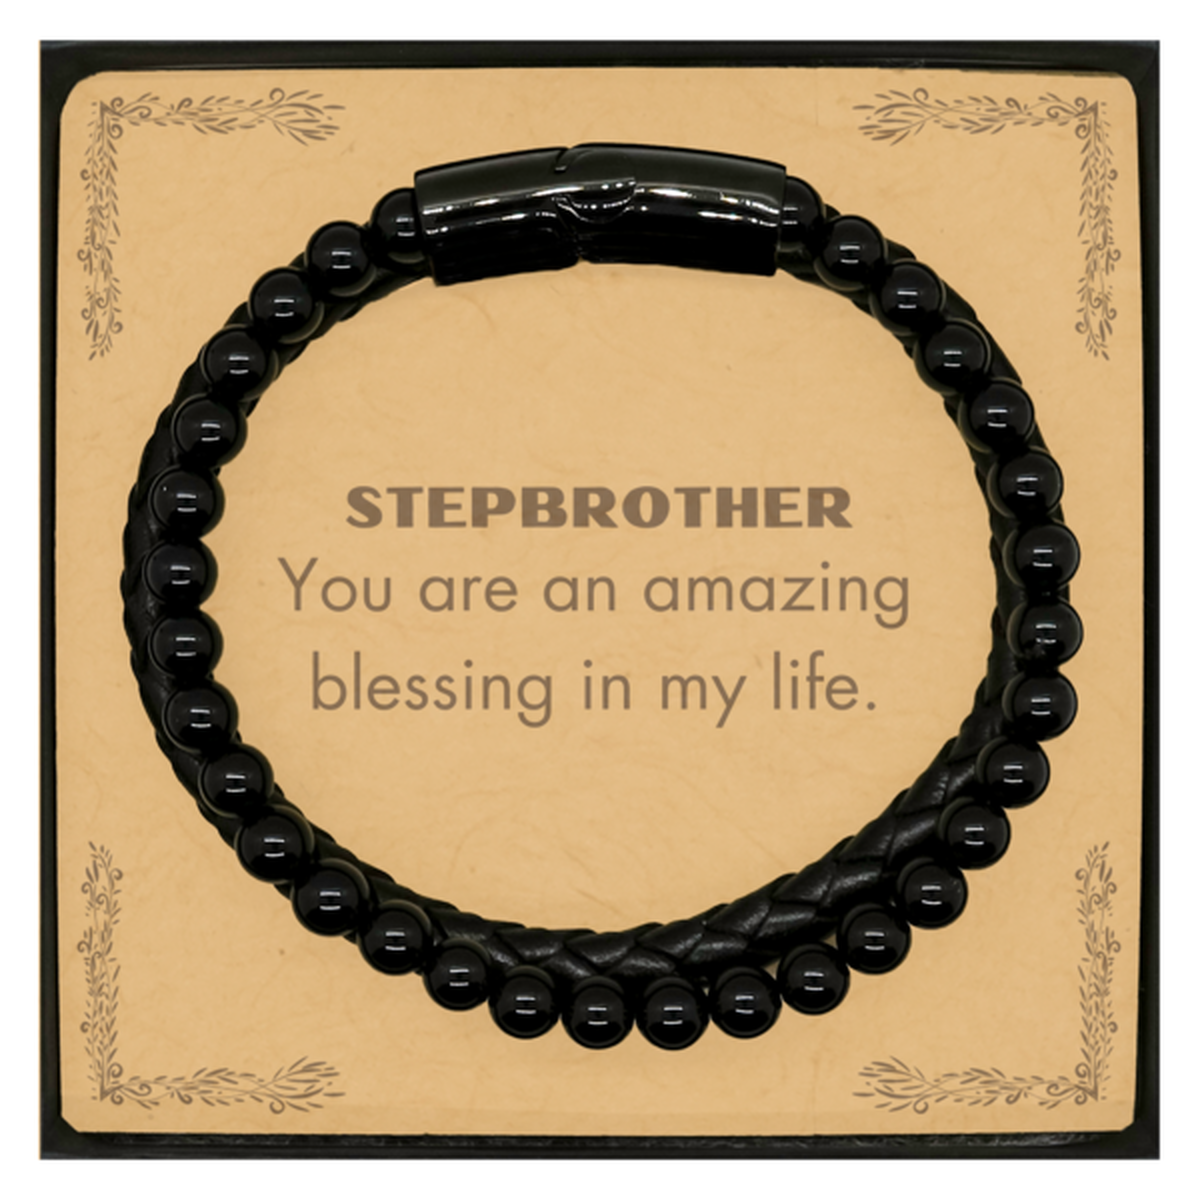 Stepbrother Stone Leather Bracelets, You are an amazing blessing in my life, Thank You Gifts For Stepbrother, Inspirational Birthday Christmas Unique Gifts For Stepbrother